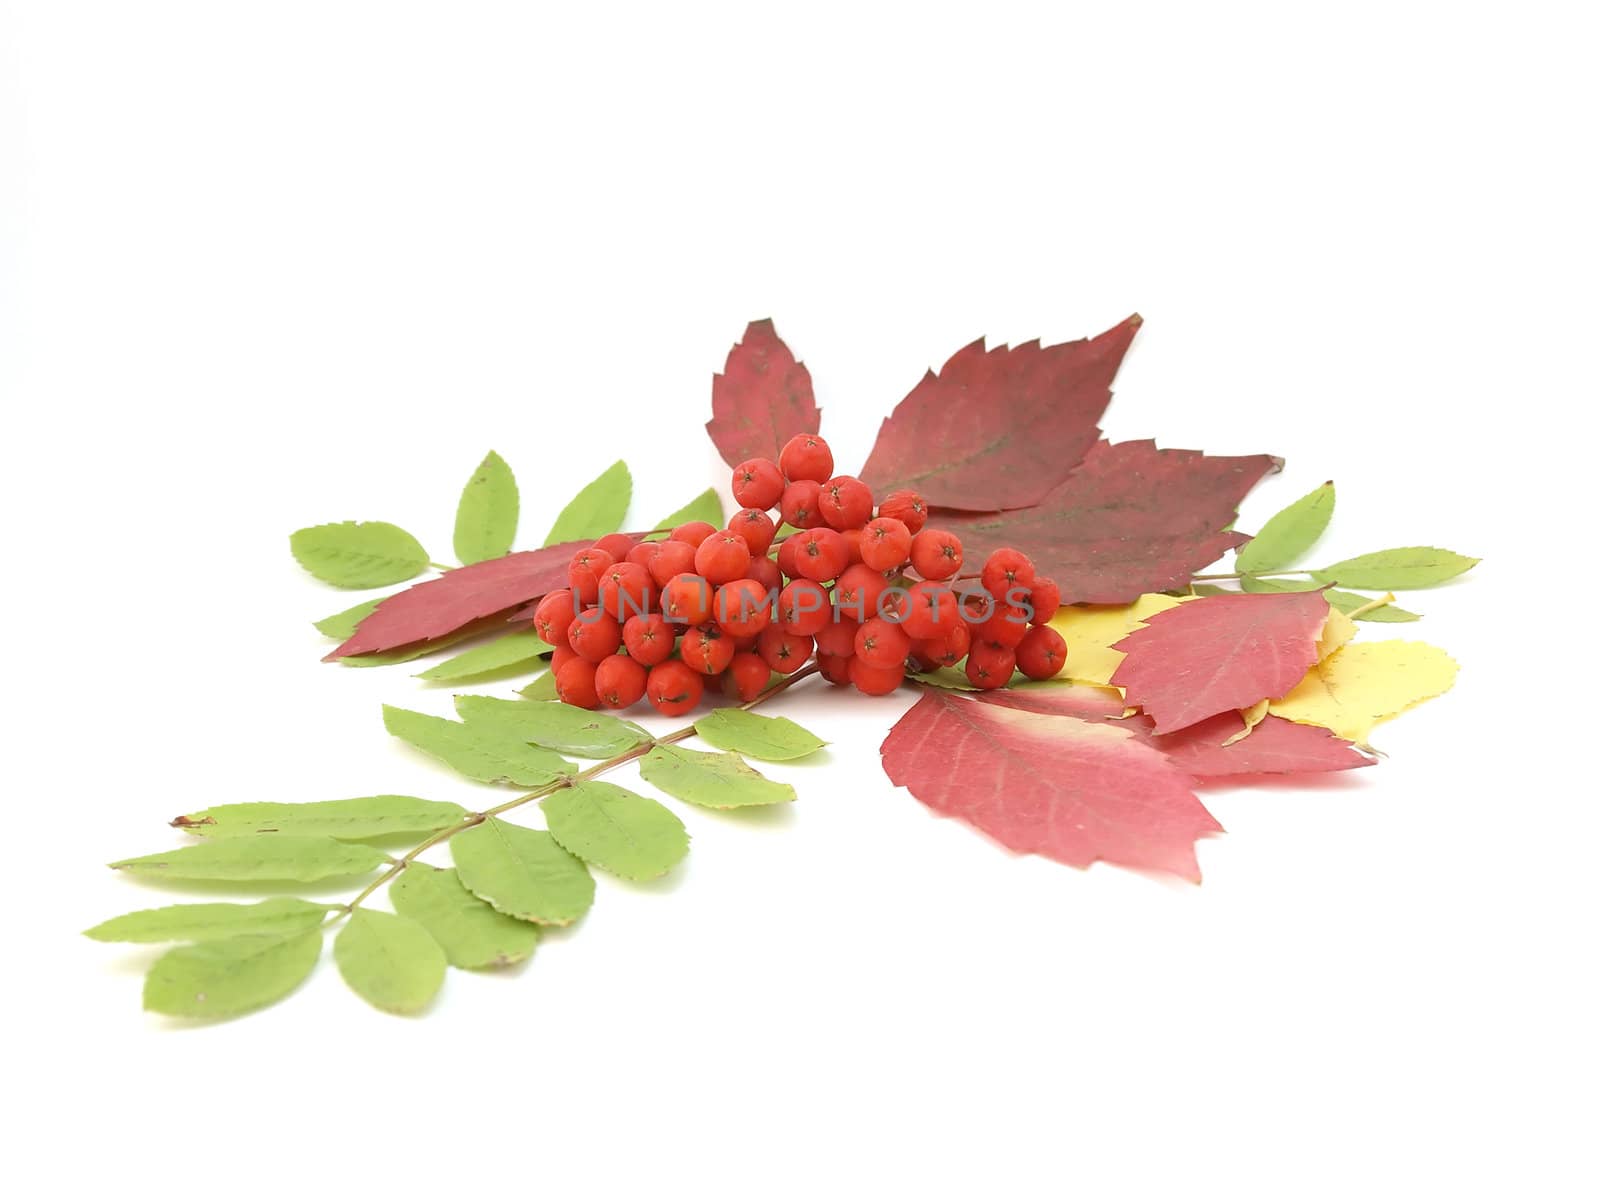 Red rowanberry and autumn leaves by sergpet